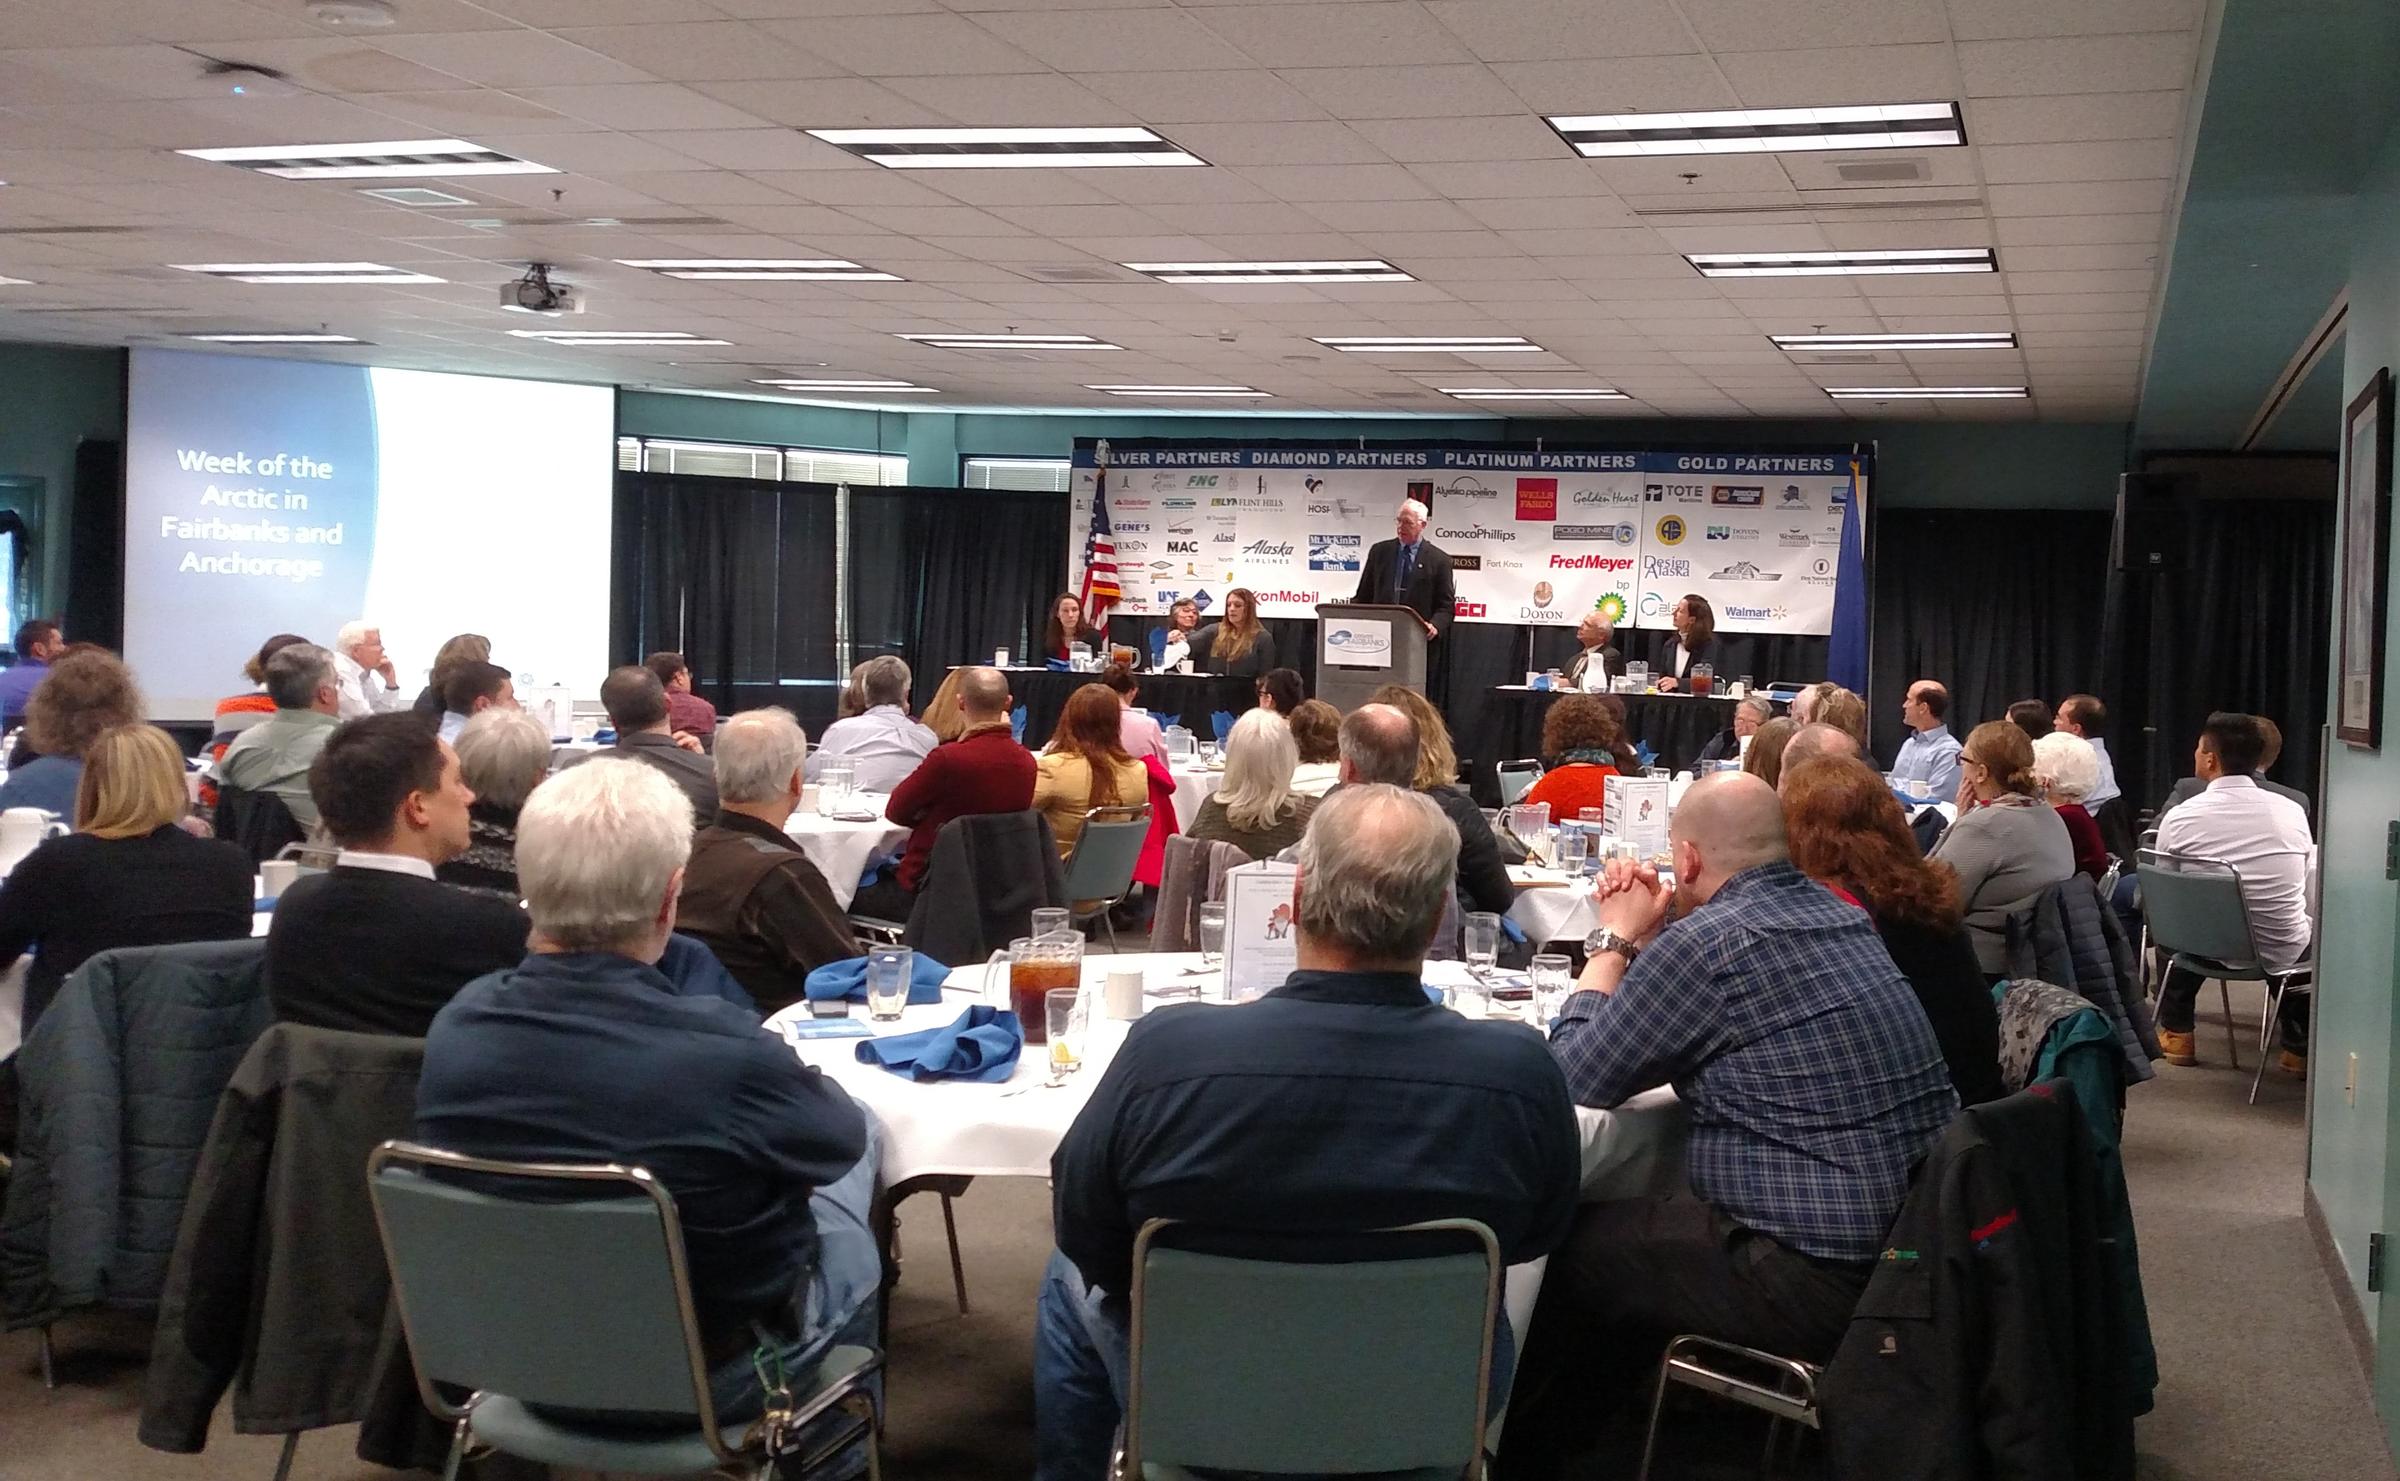 Larry Hinzman, vice chancellor of research for University of Alaska Fairbanks, talks about the Week of the Arctic at the Feb. 28 Greater Fairbanks Chamber of Commerce meeting. (Photo by Tim Ellis/KUAC)